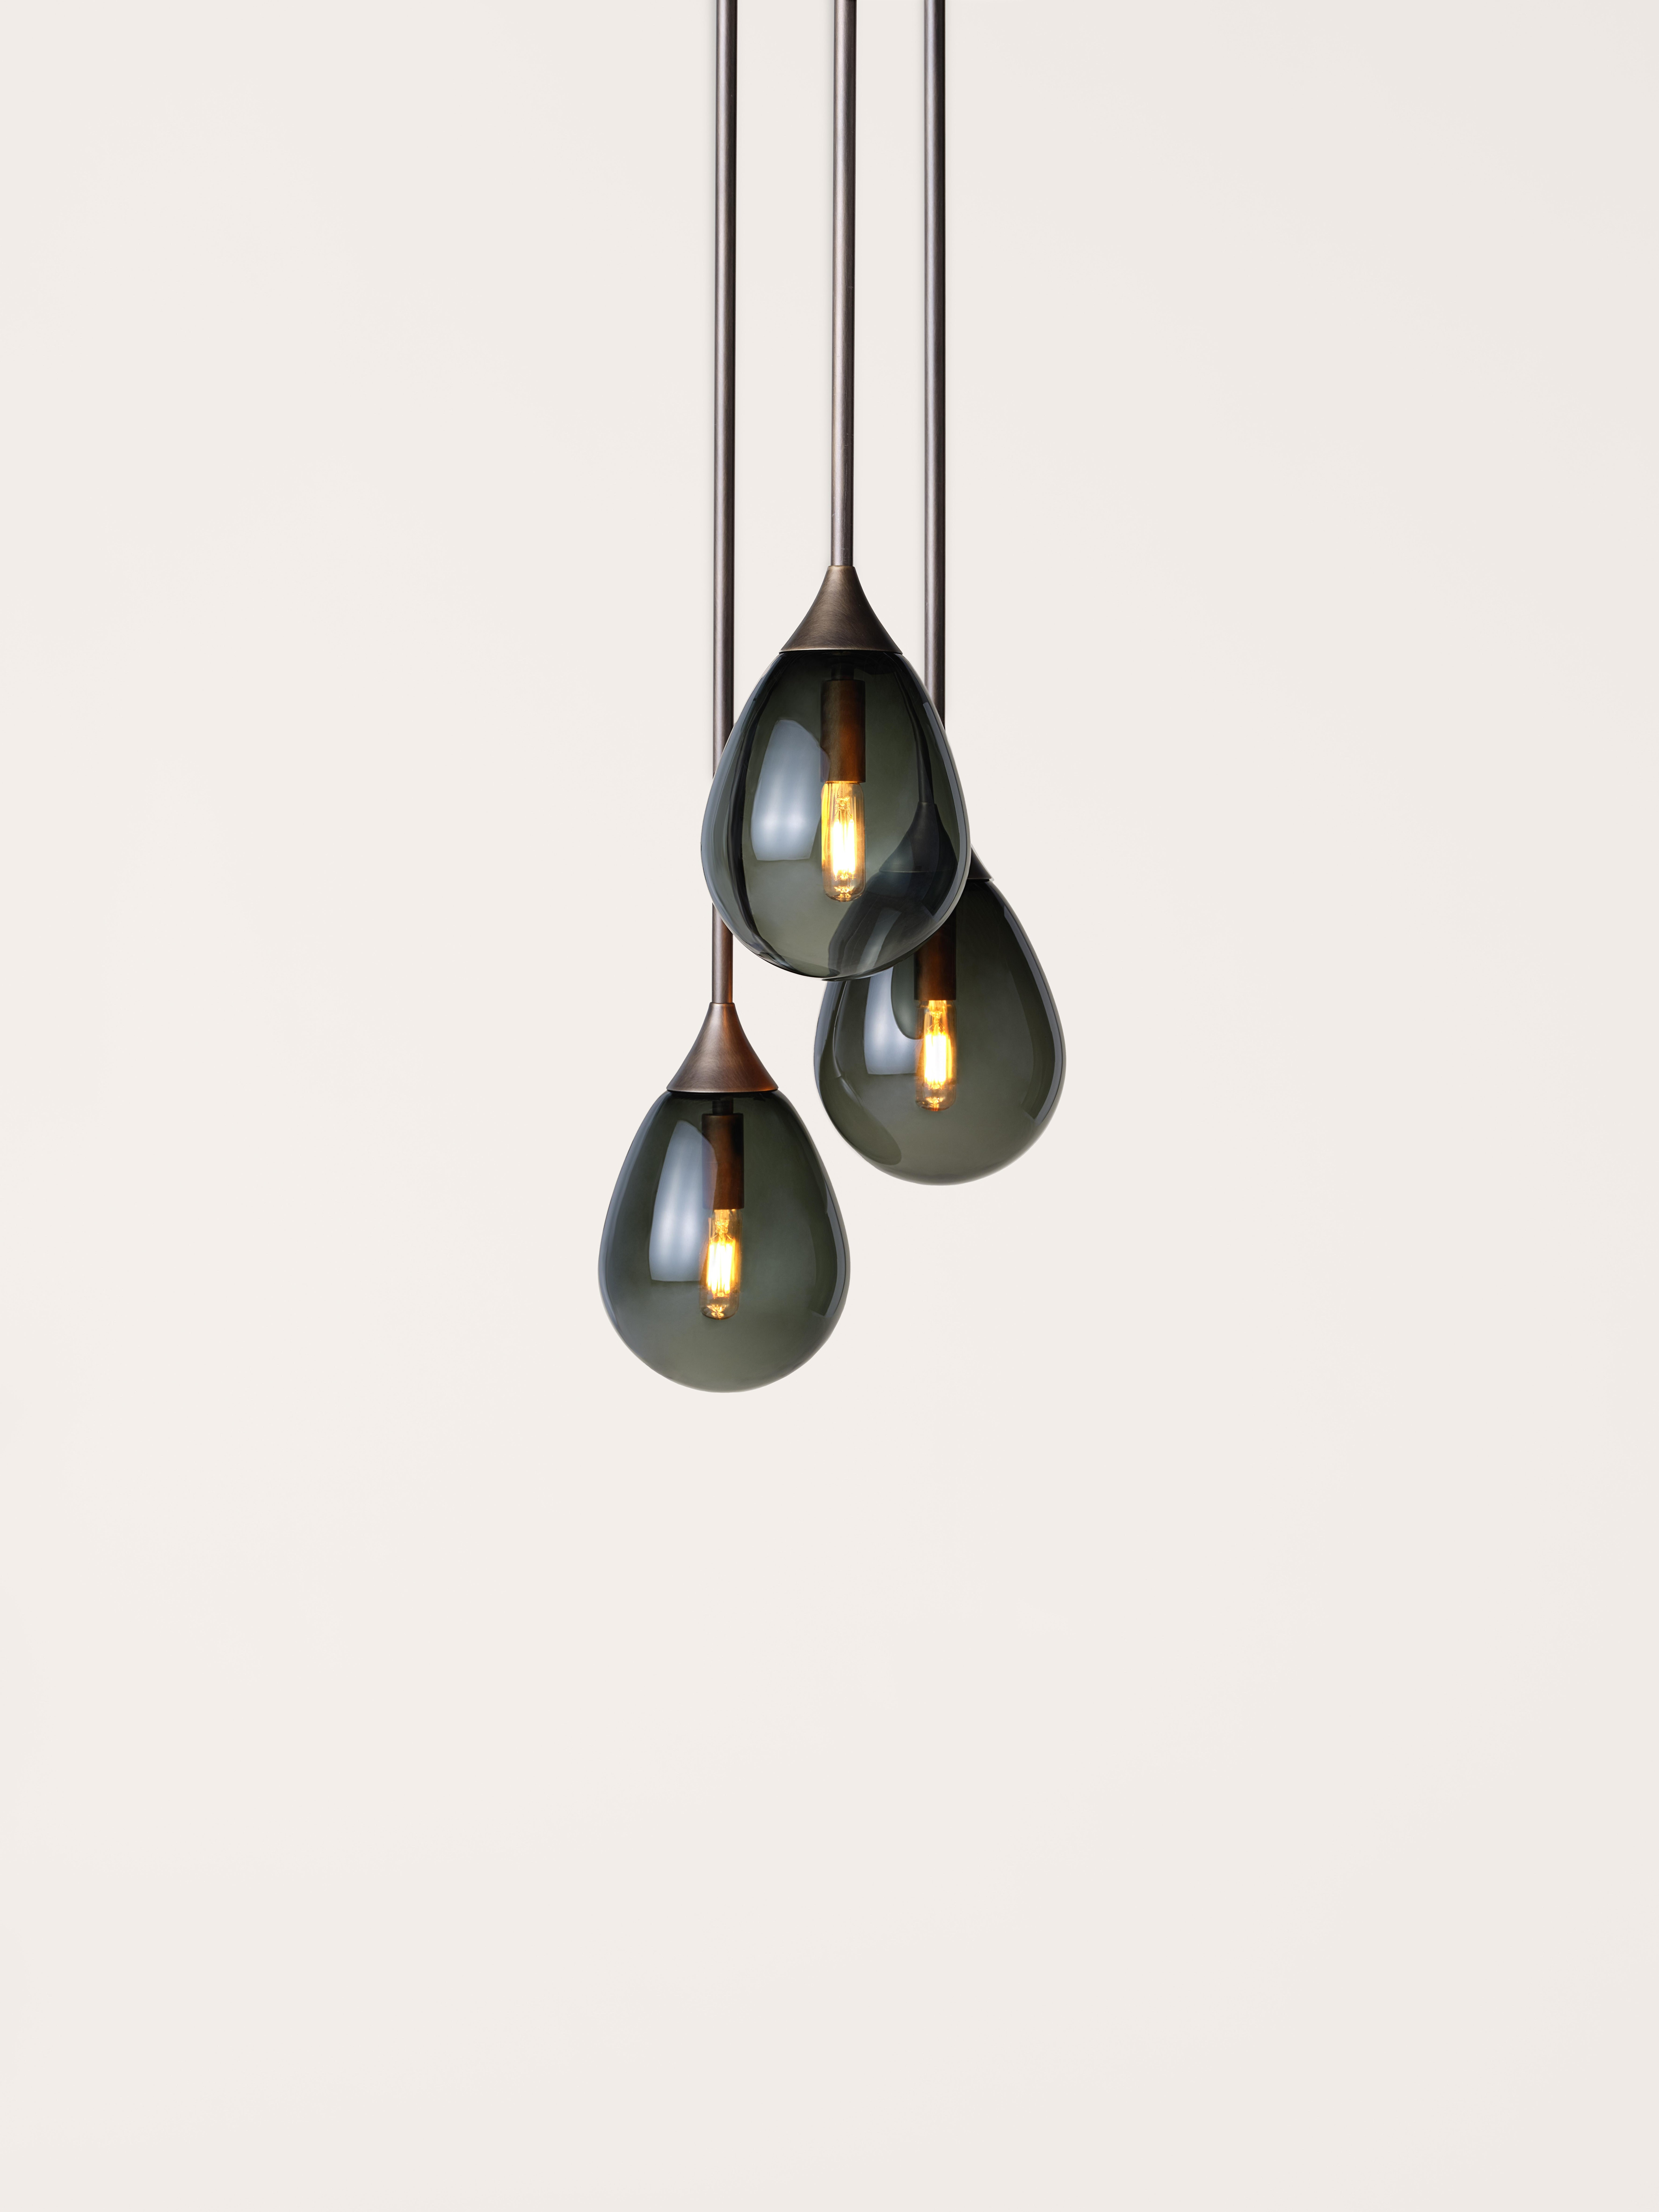 Three carefully crafted, hand blown glass pendants hang clustered together from spun brass for elongated and elegant tear-drop shapes. Also available in a larger size, and as a single pendant, a cluster of five and a sconce.

Metal finish:
Satin